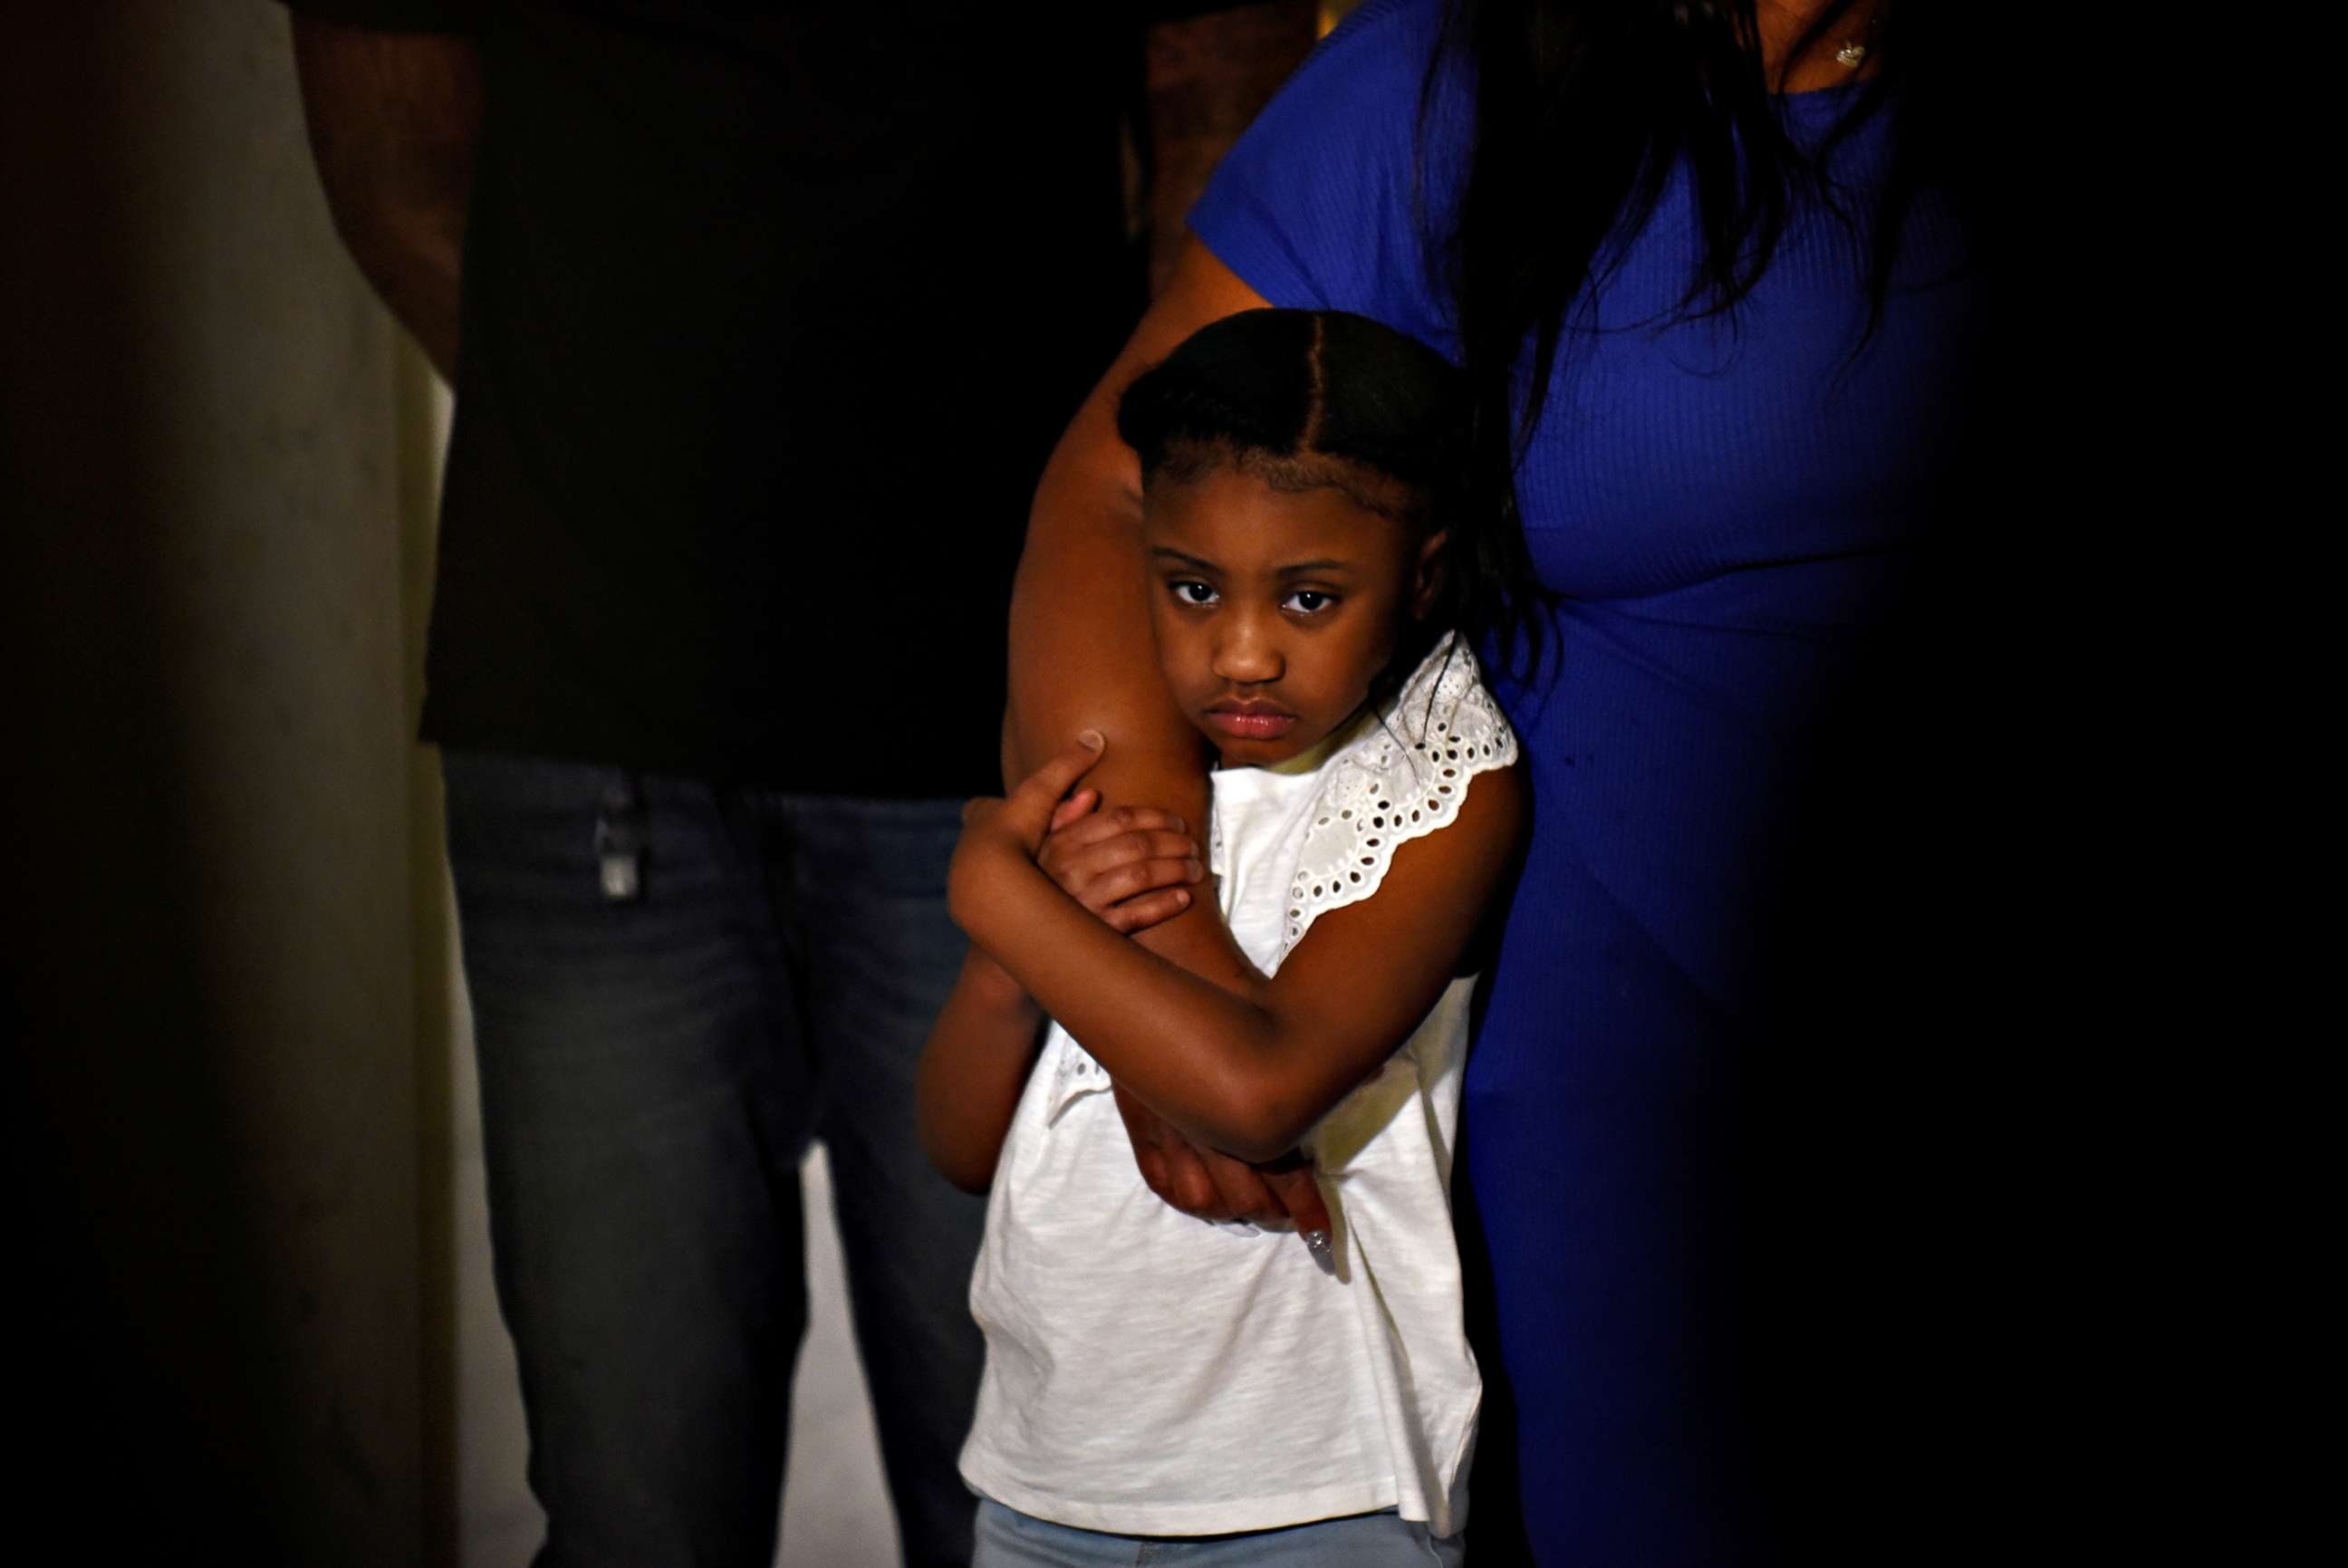 PHOTO: George Floyd's daughter, Gianna Floyd, 6, is seen during a press conference at Minneapolis City Hall following the death in Minneapolis police custody of George Floyd in Minneapolis, Minn., June 2, 2020.